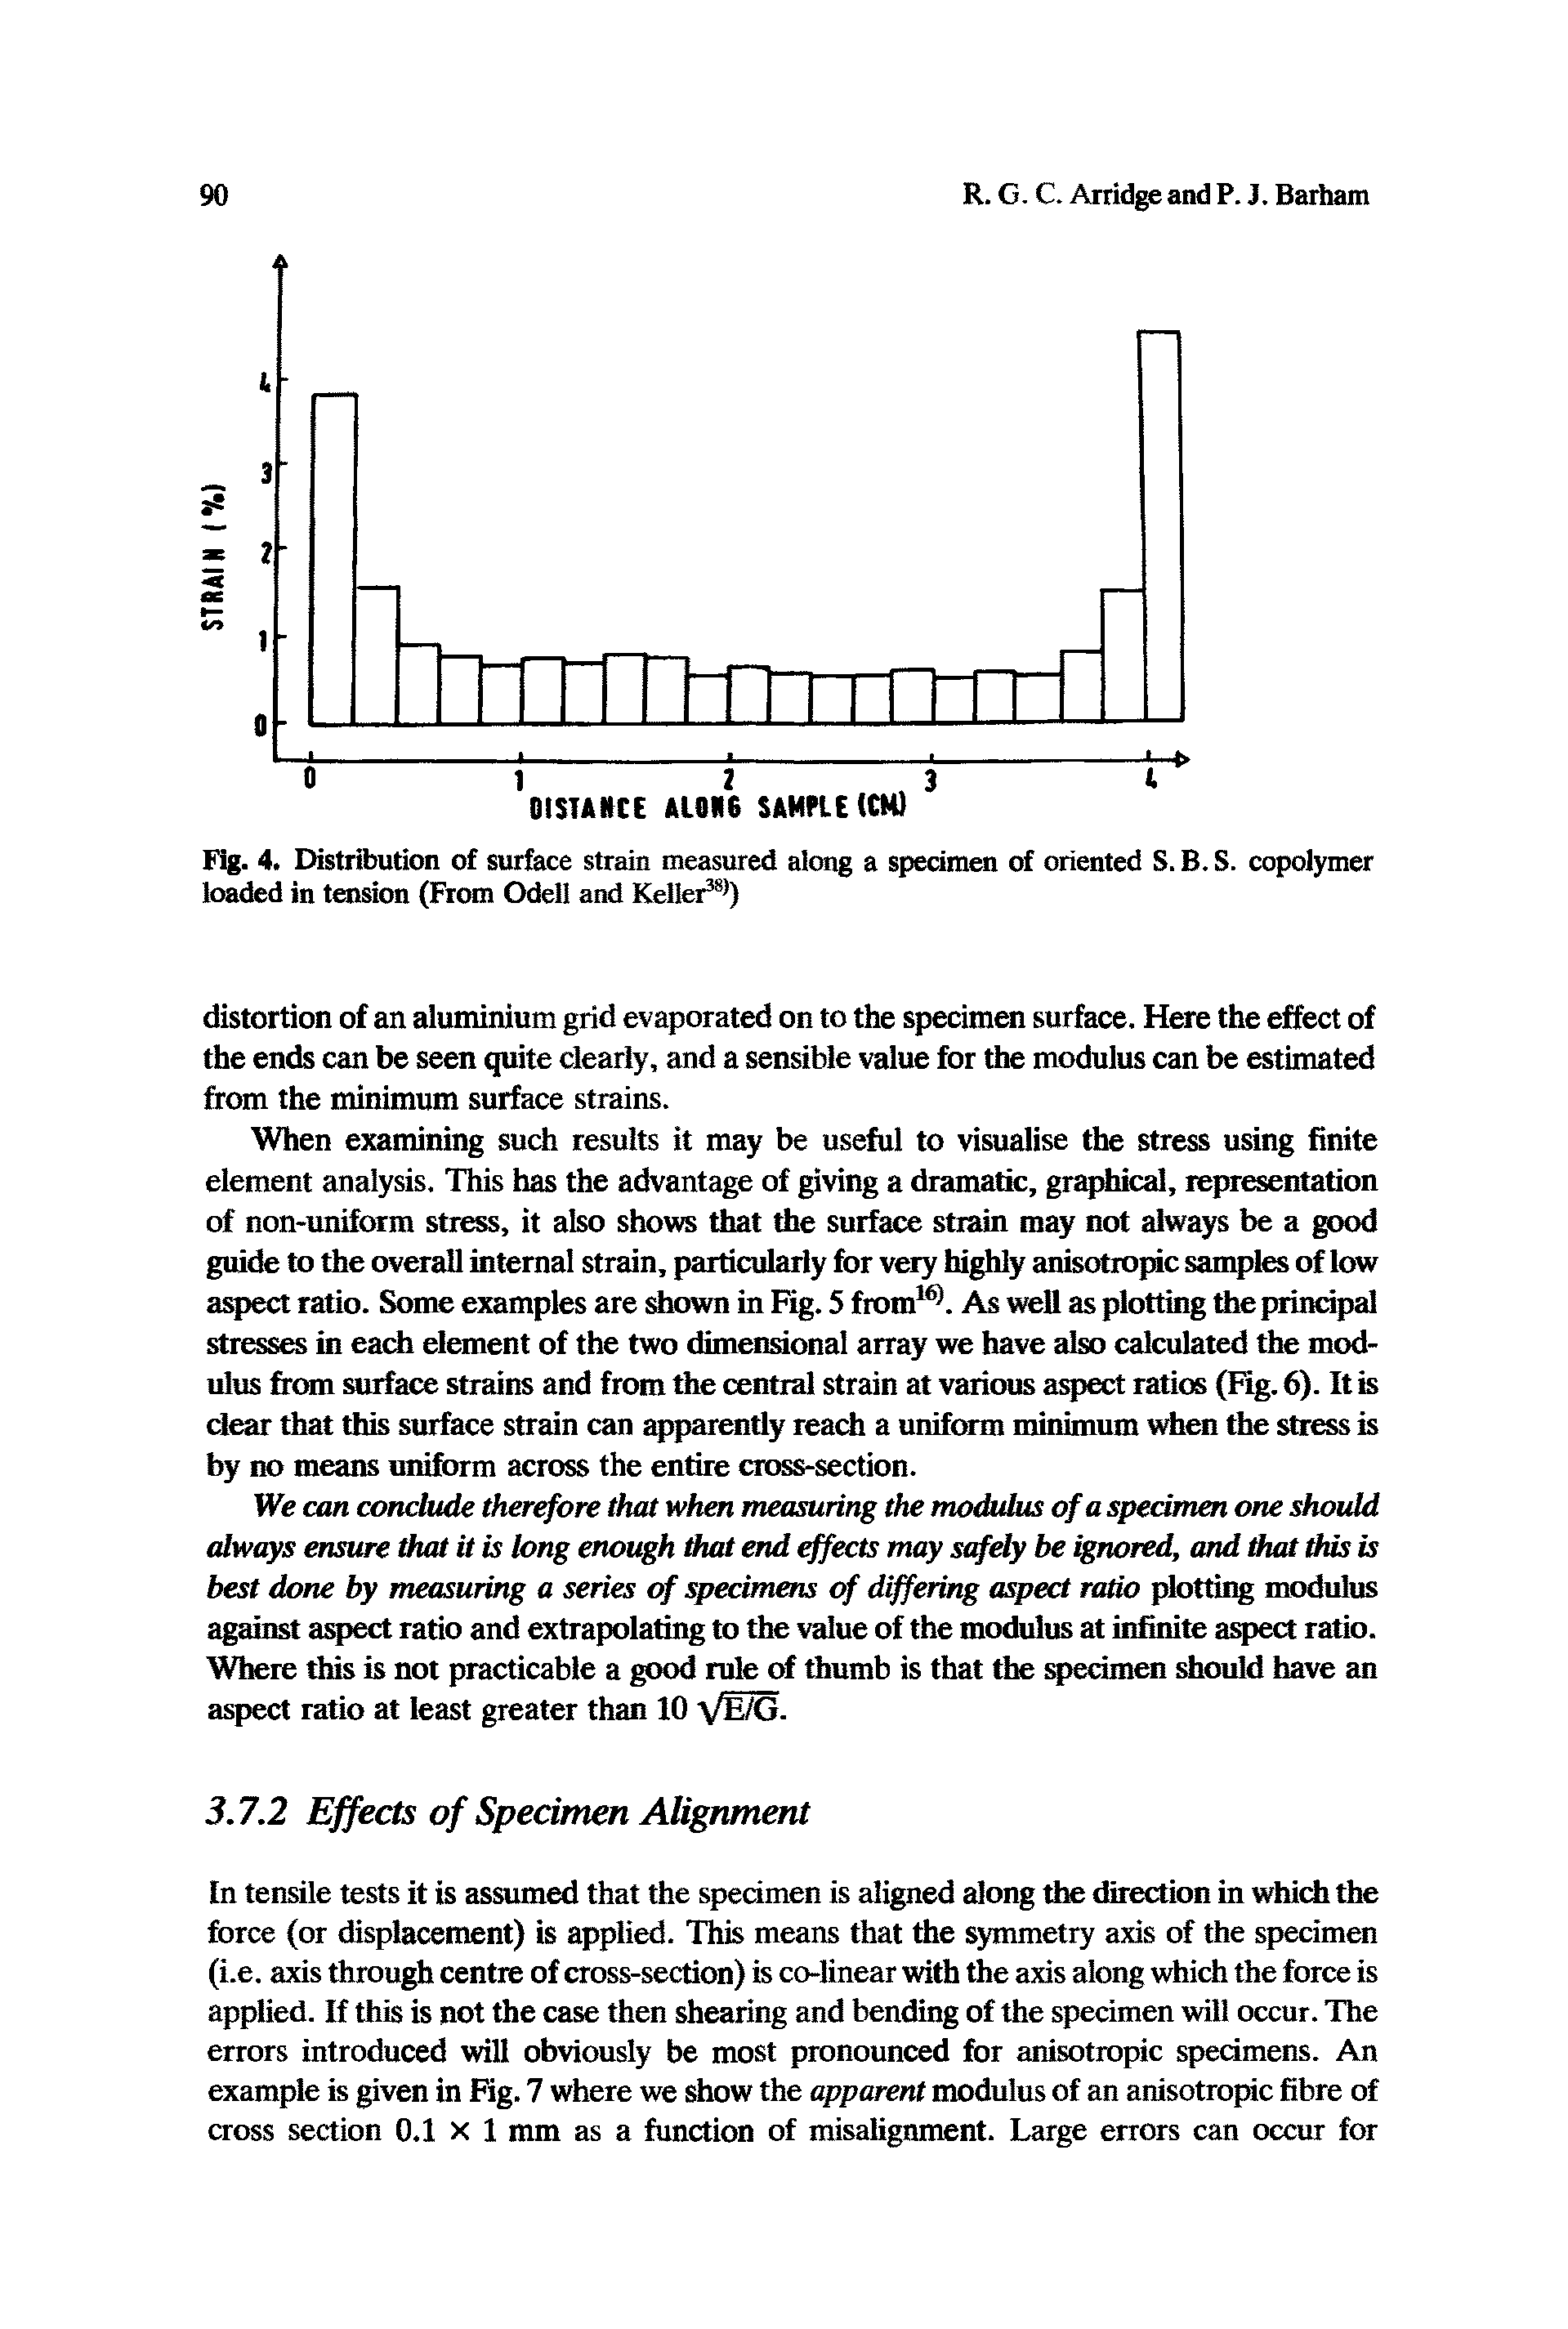 Fig. 4. Distribution of surface strain measured along a specimen of oriented S. B. S. copolymer loaded in tension (From Odell and Keller38))...